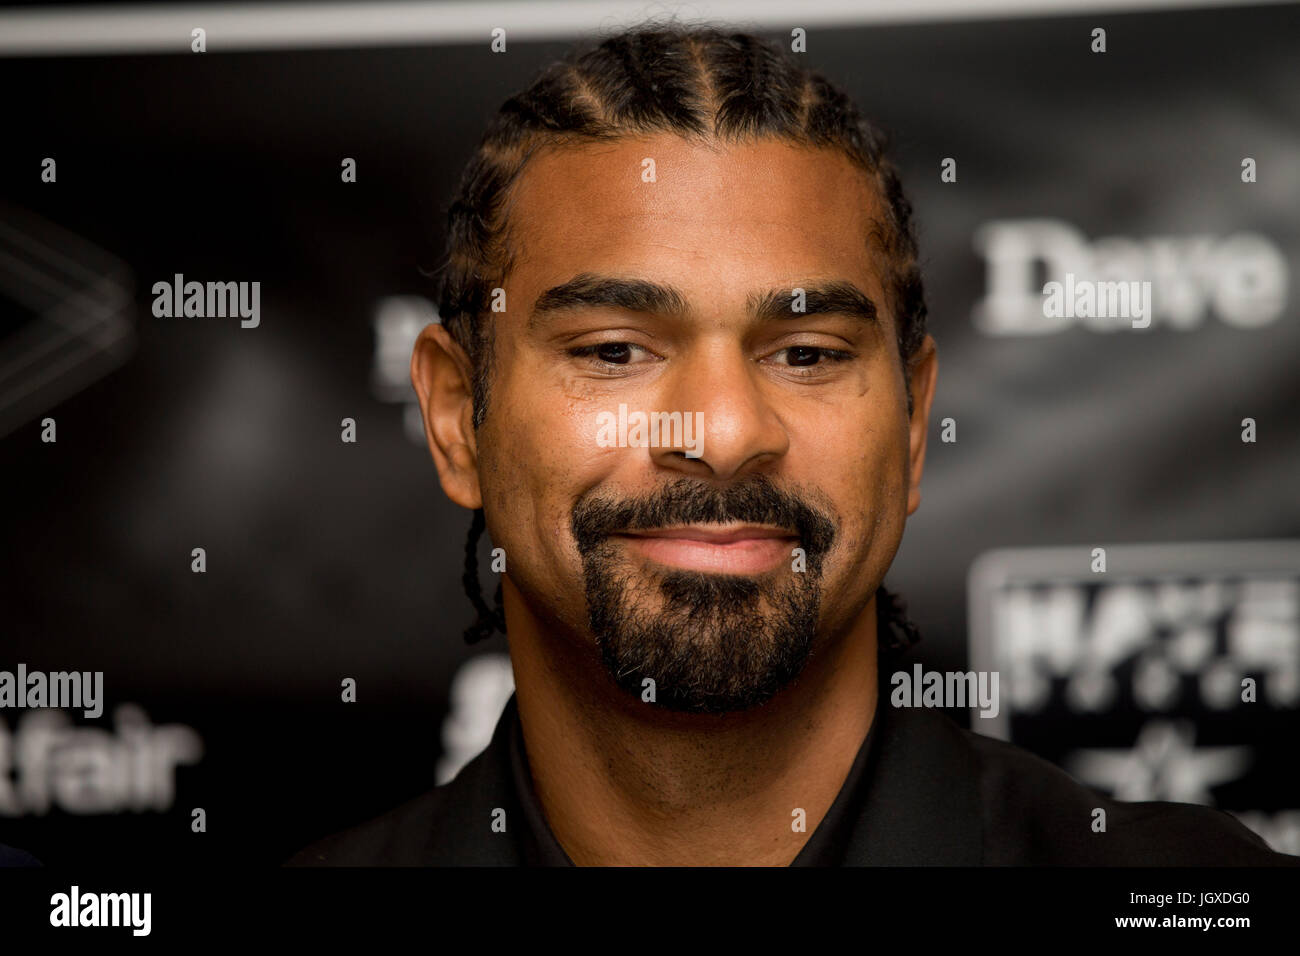 London, UK. 12 July 2017. British boxer, who's won the major world cruiserweight titles and The World Boxing Association (WBA) World Heavyweight Championship, appears at press conference to discuss his return to boxing. Credit: Sebastian Remme/Alamy Live News Stock Photo